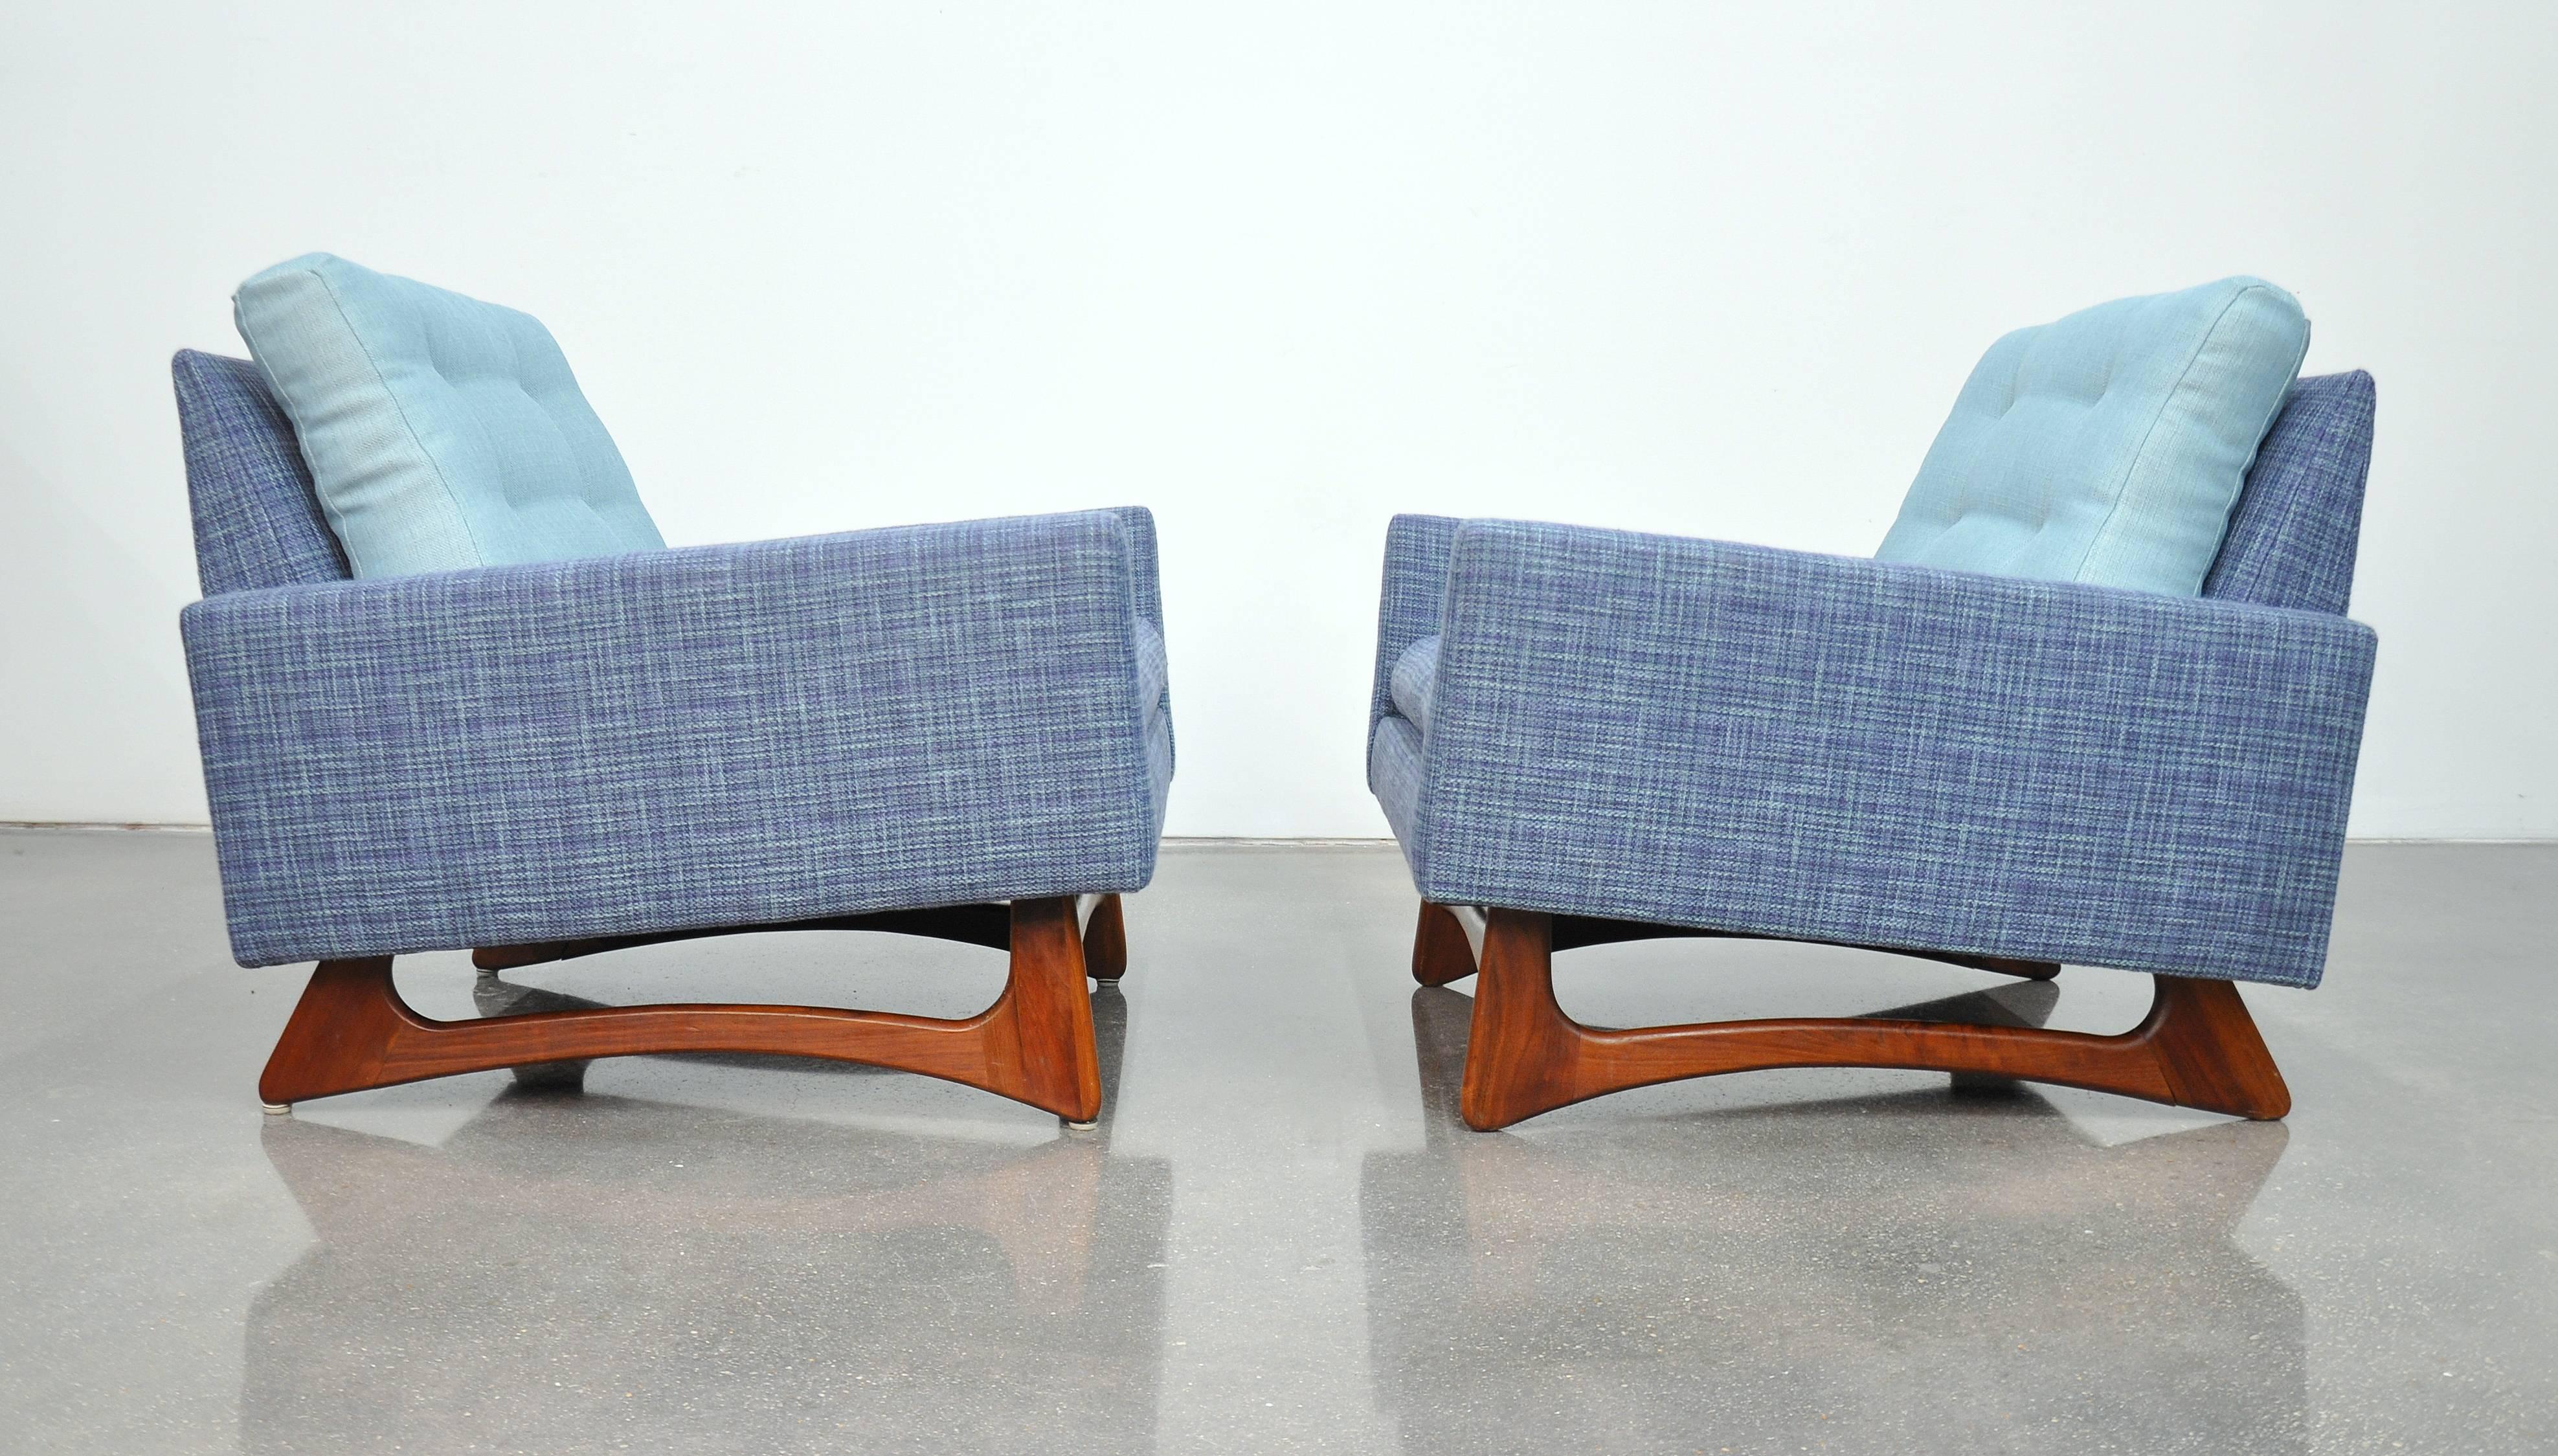 A pair of newly reupholstered Mid-Century Modern model 2406-C tufted club chairs featuring a beautifully grained, sculpted walnut frame, a quintessential characteristic of designer Adrian Pearsall. Each vintage armchair has been recovered in navy or